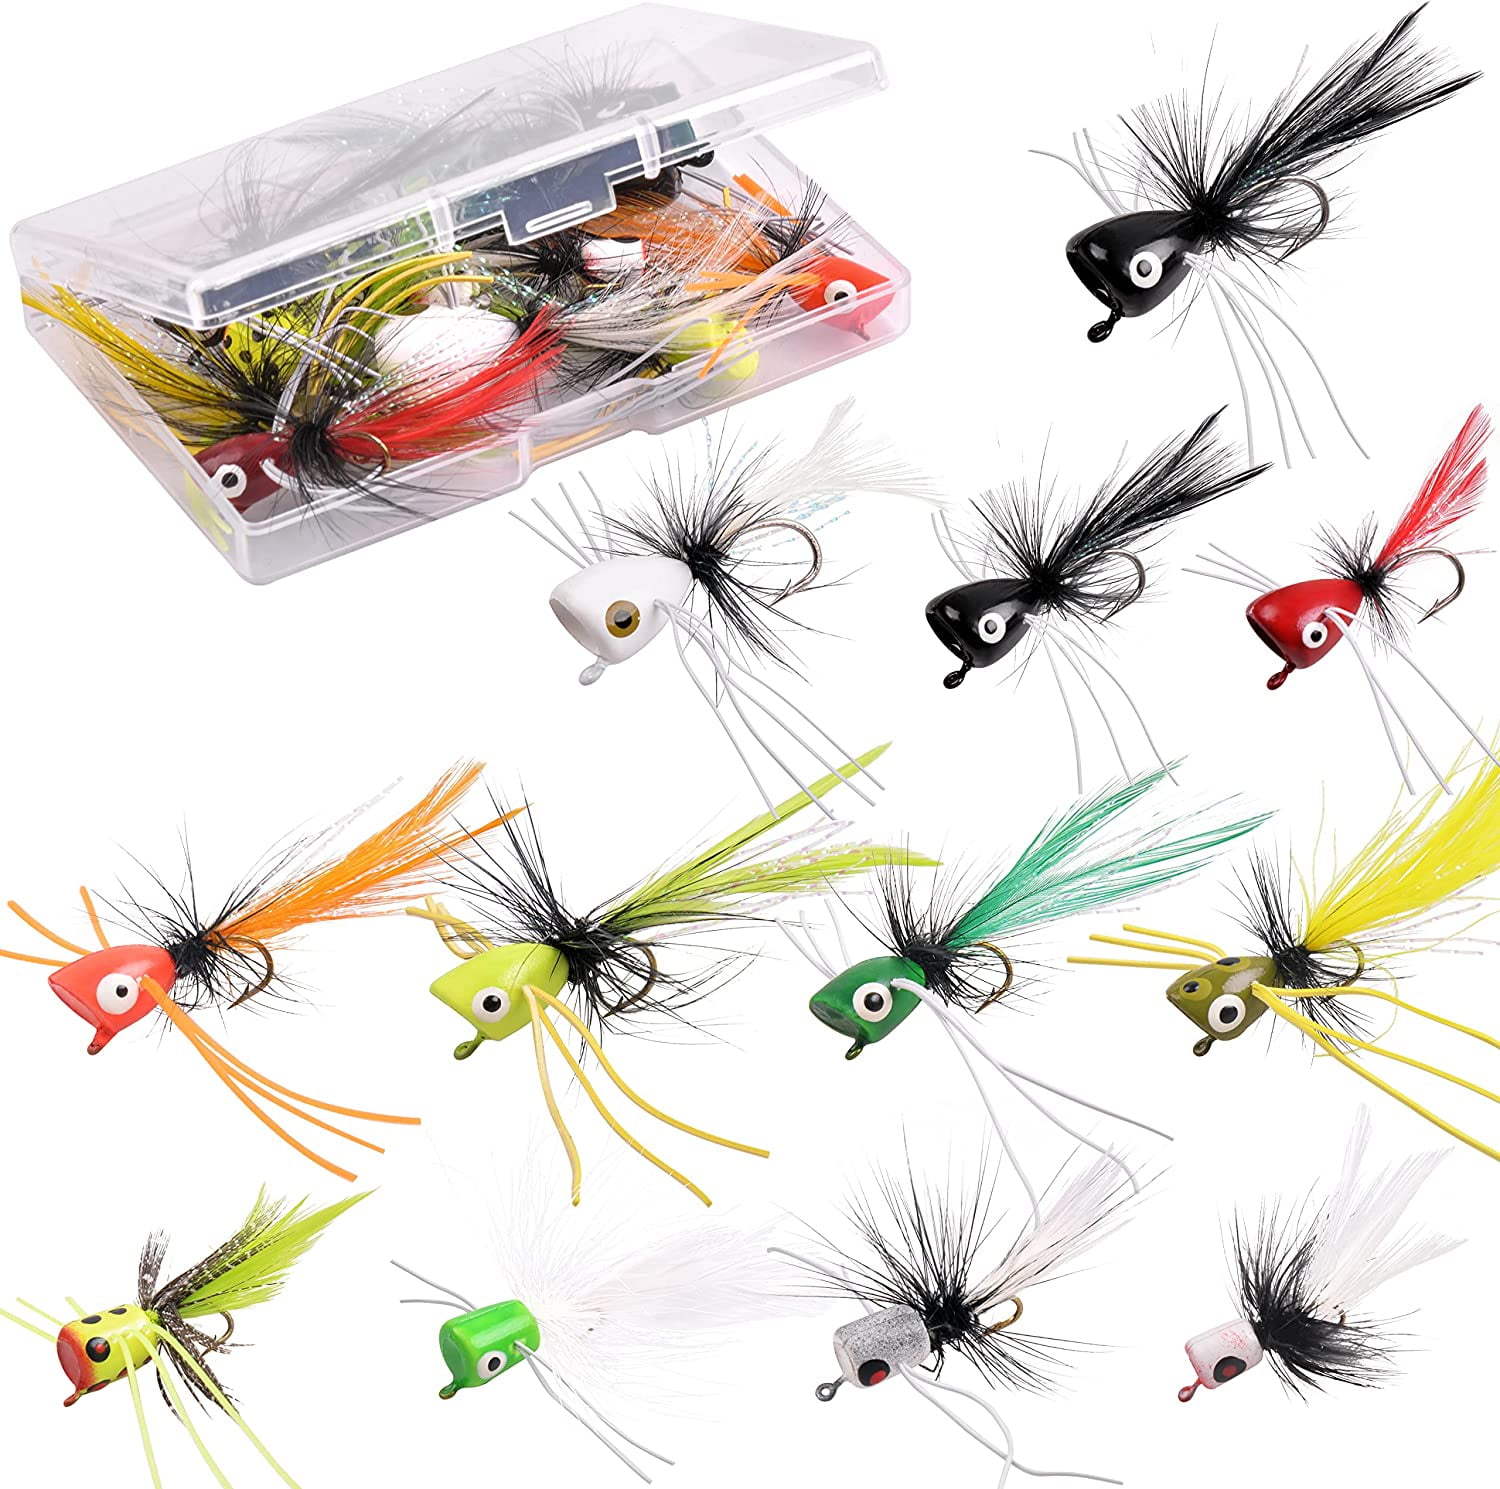 OROOTL Fly Fishing Popper Flies, 12pcs Fly Popper Lures Bass Panfish  Bluegill Crappie Popping Bug Sunfish Trout Salmon Poppers Flys Kit for Fly  Fishing 